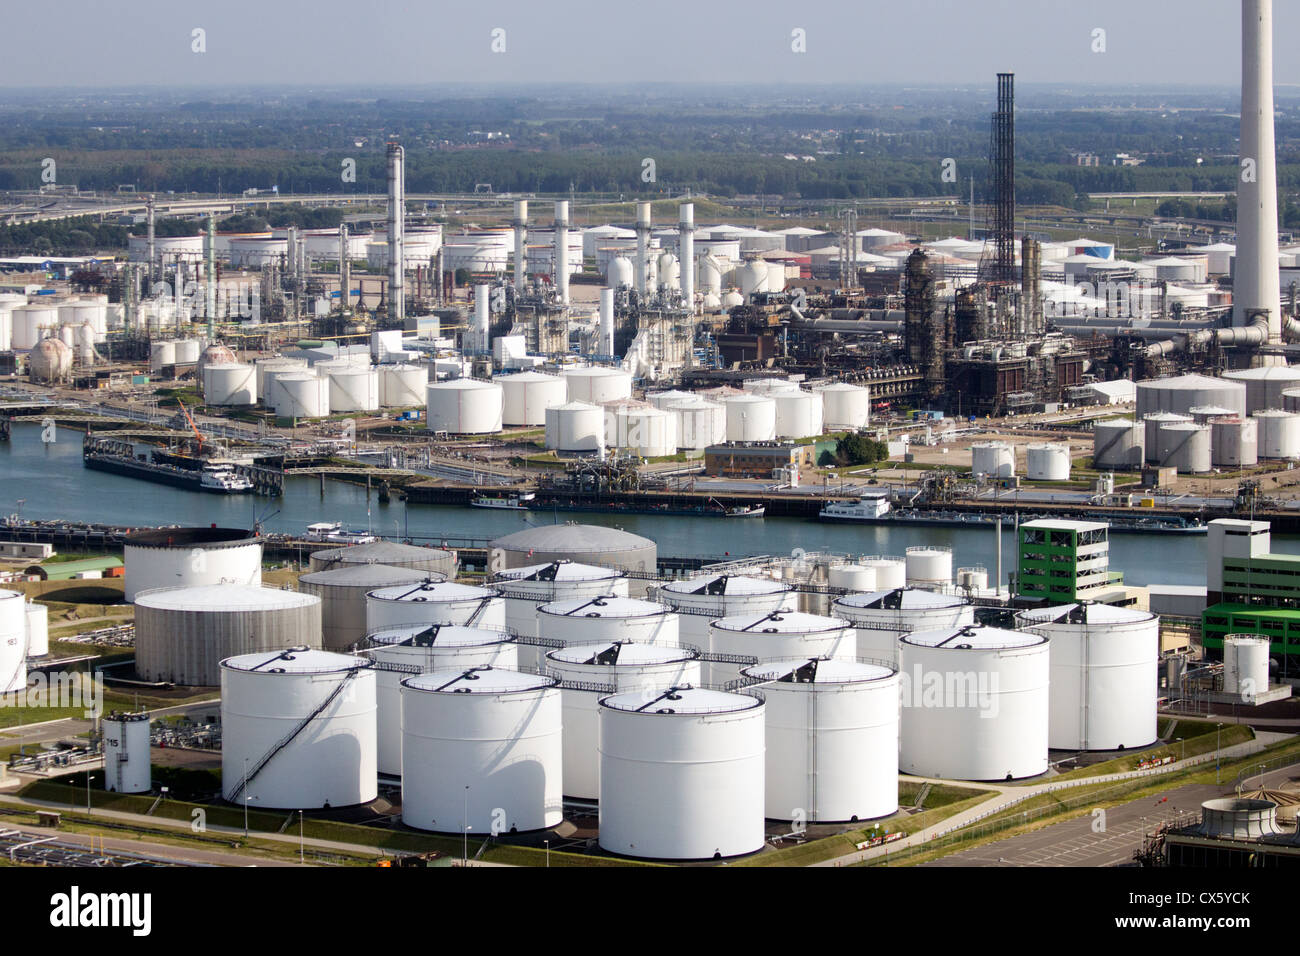 Aerial view of the port of Rotterdam with oil refinery storage tanks Stock Photo